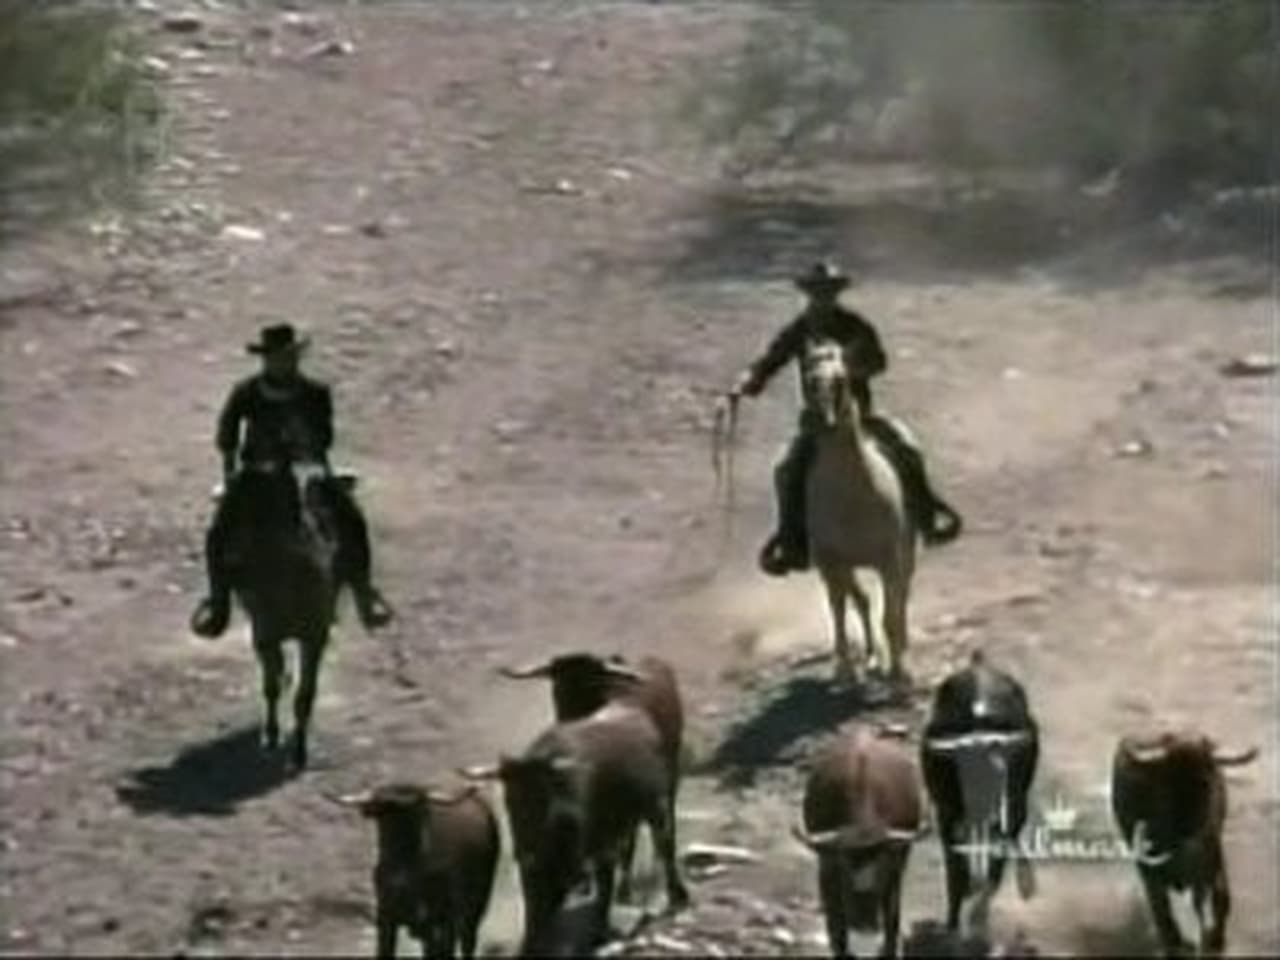 The High Chaparral - Season 1 Episode 7 : Shadows on the Land